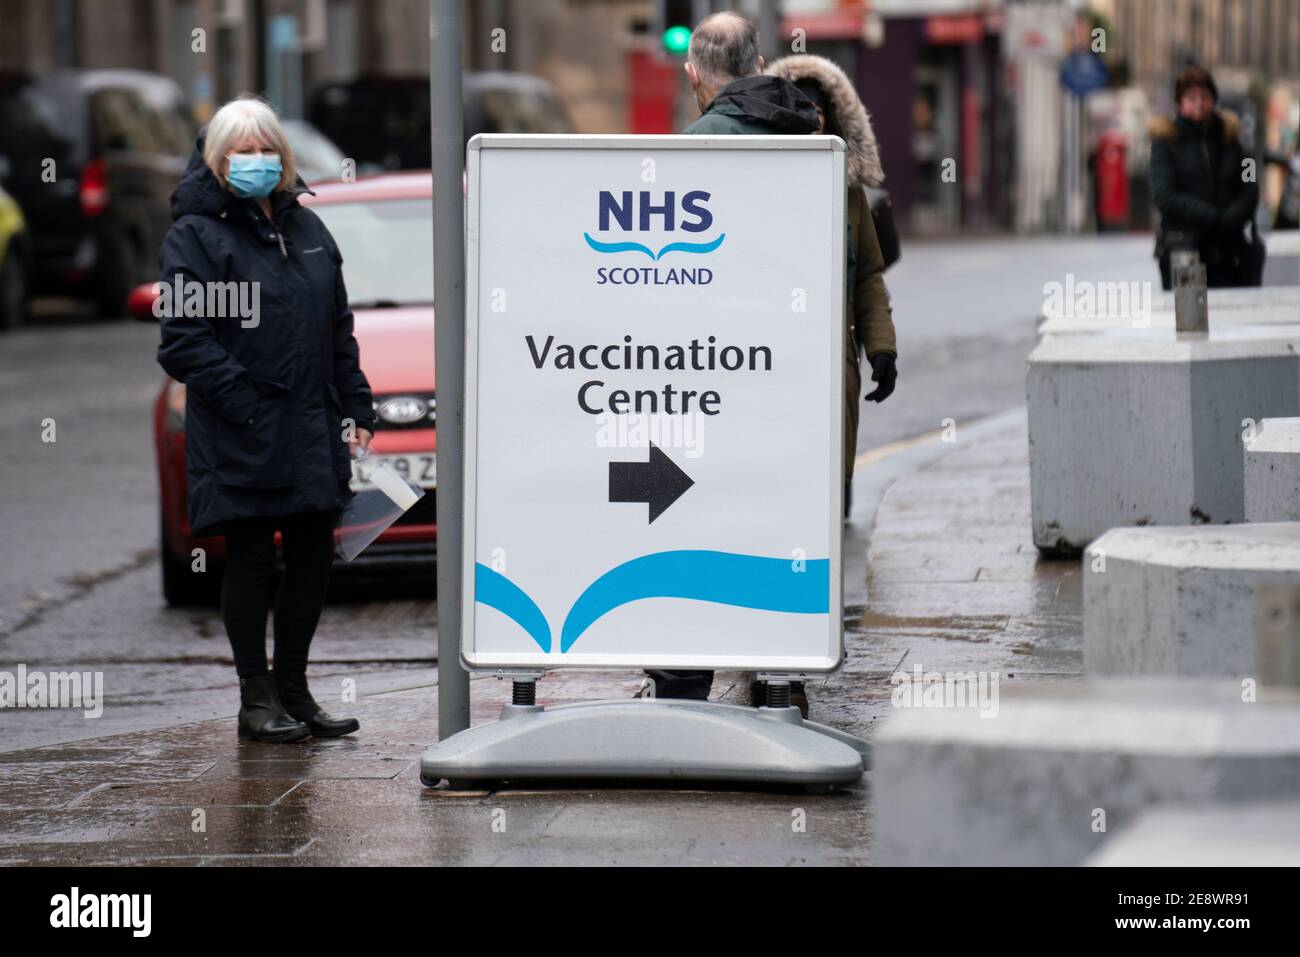 Edinburgh, Scotland, UK. 1 February 2021. Mass Covid-19 vaccination centre opens today at EICC ( Edinburgh International Conference Centre ) in Edinburgh. Members of the public with appointments arrive for their vaccinations. Iain Masterton/Alamy Live News Stock Photo